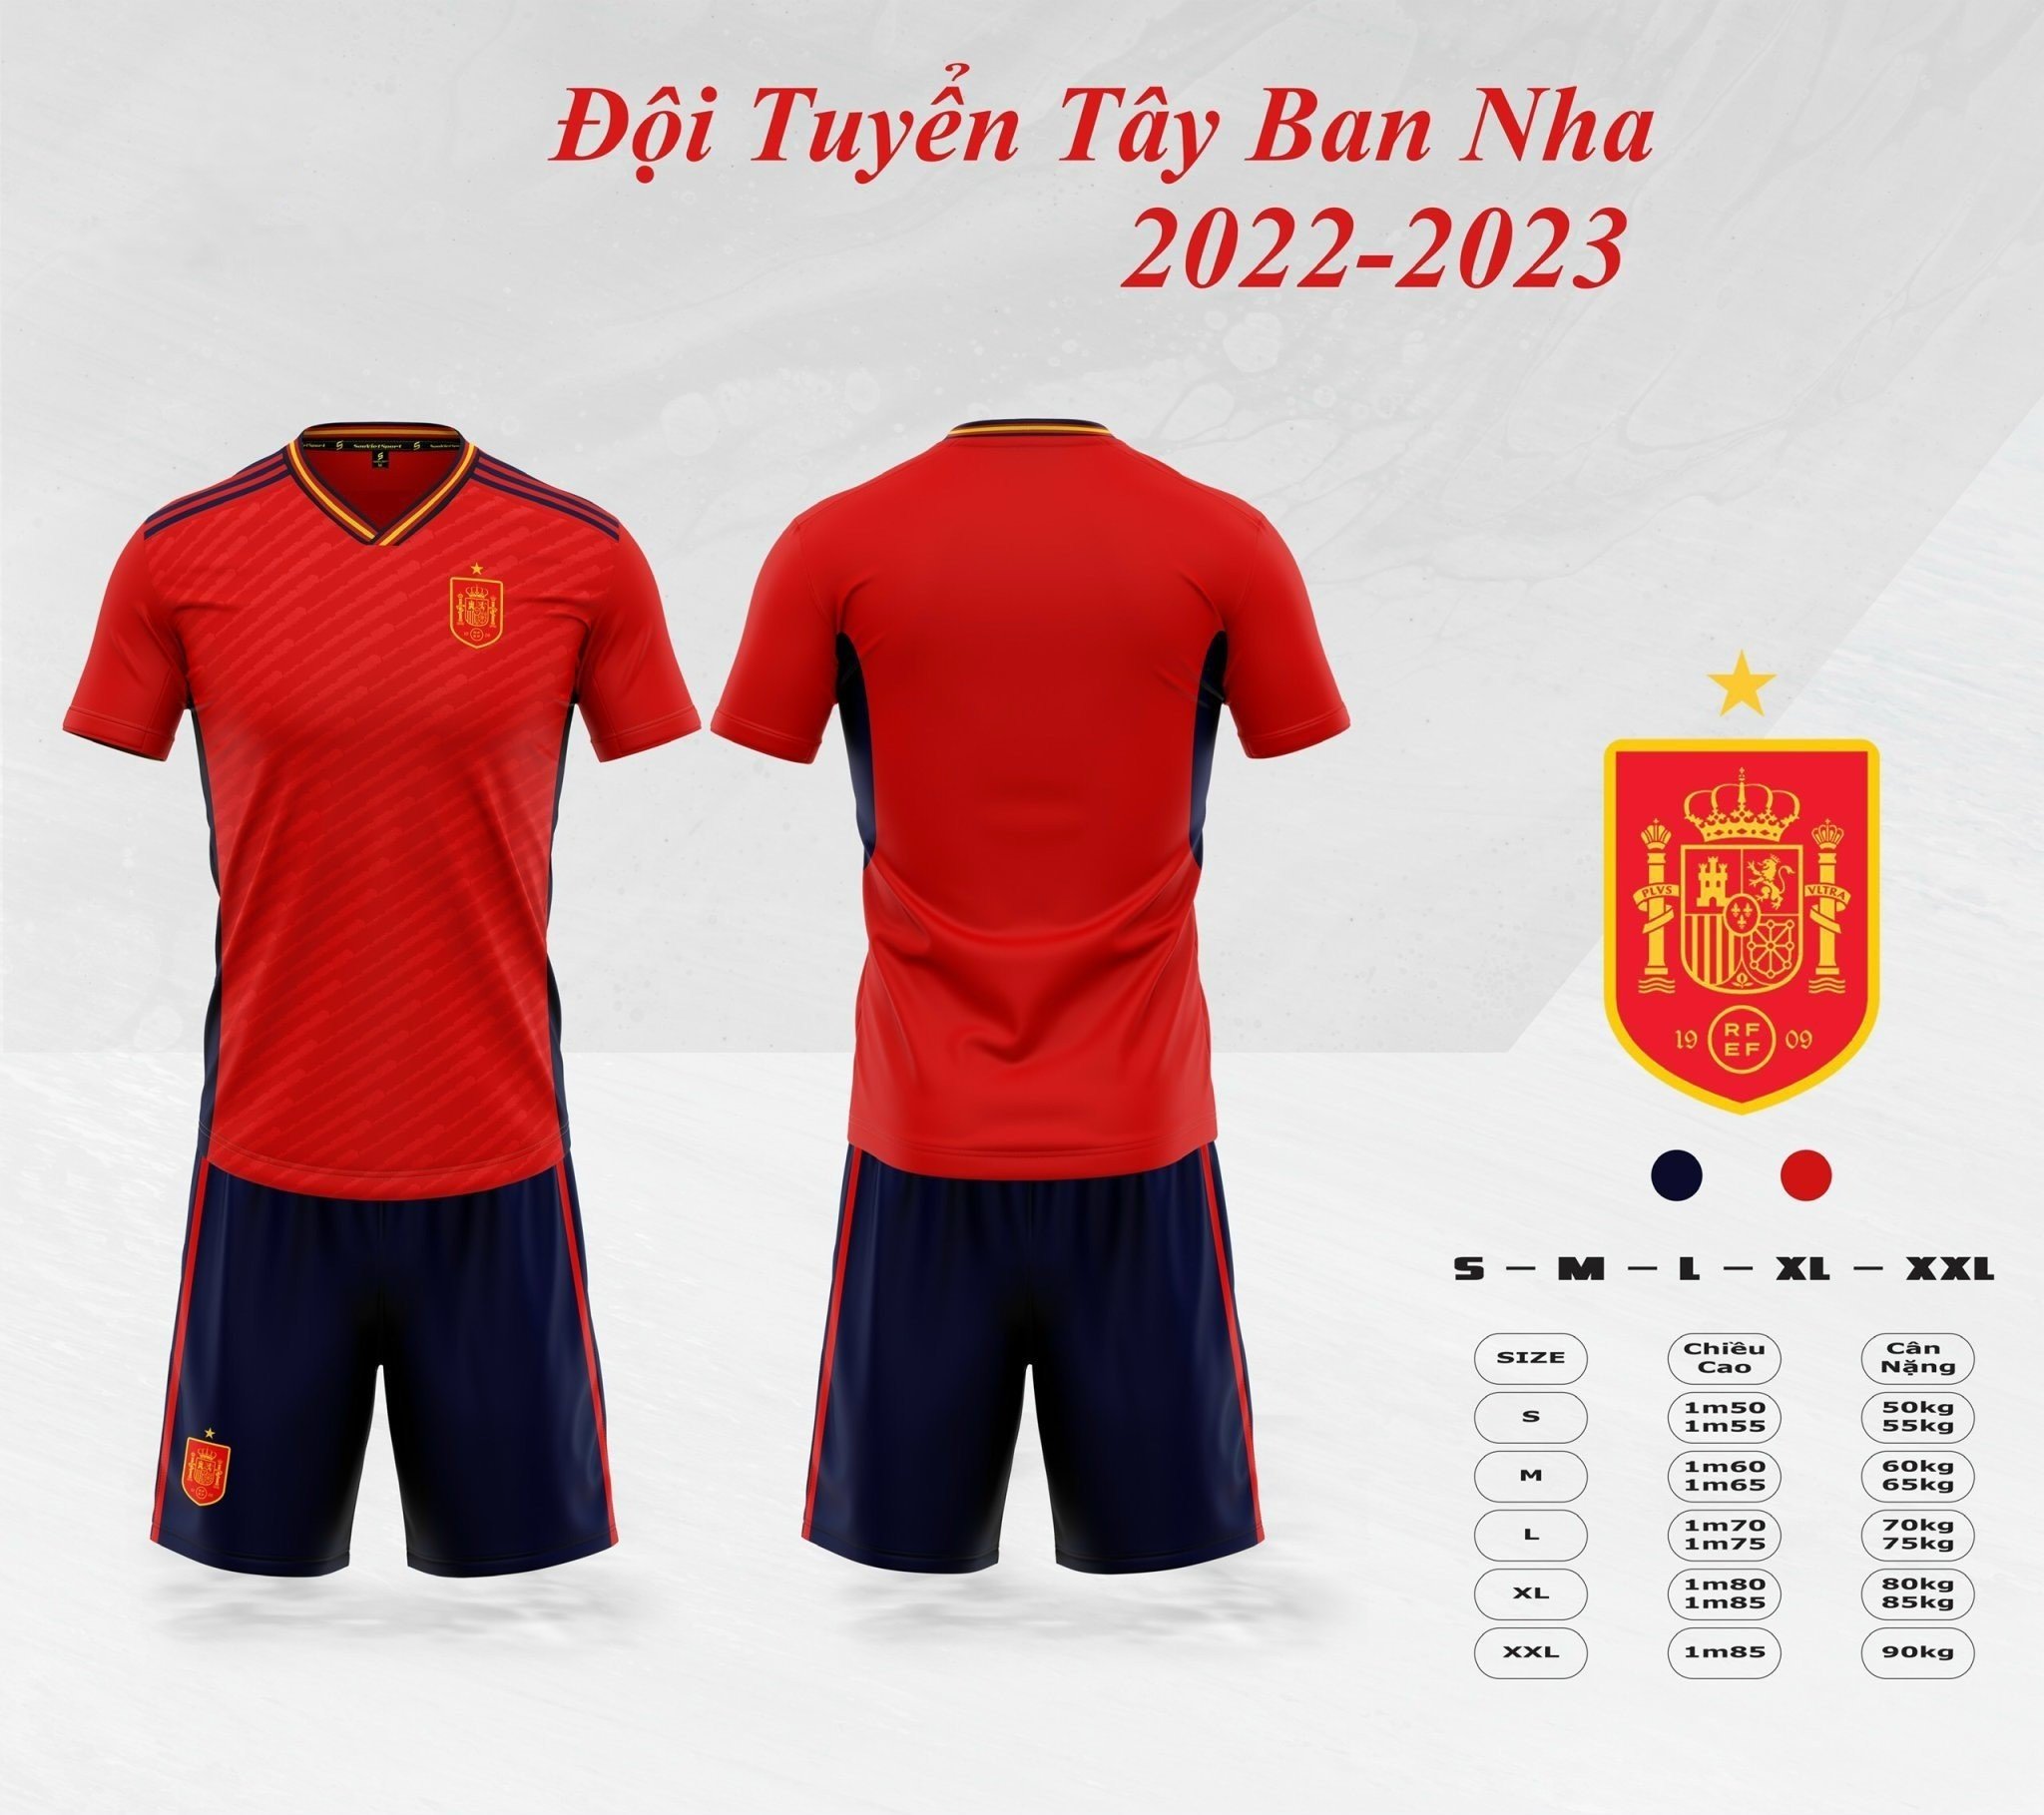 Soccer Wear Kit Fast Delivery New Style For Men Odm Each One In Opp Bag From Vietnam Manufacturer 2